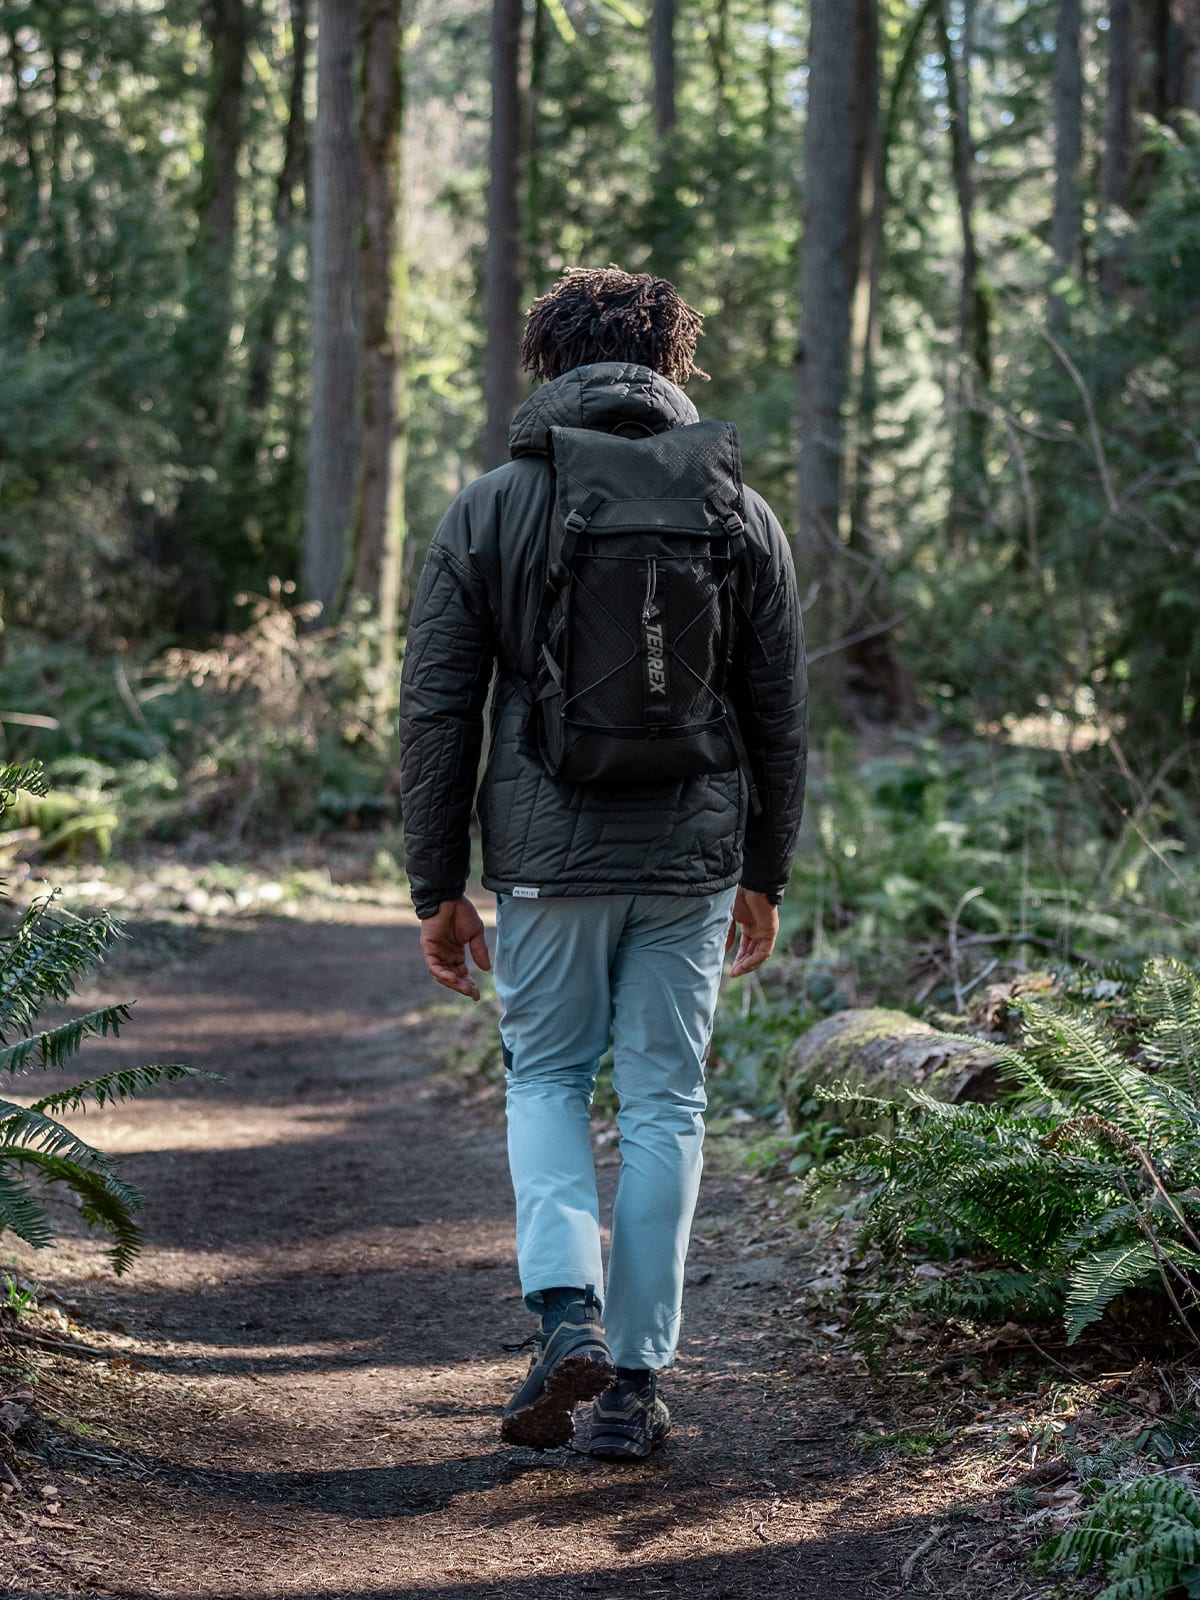 What To Bring On a Hike: 12 Hiking Essentials